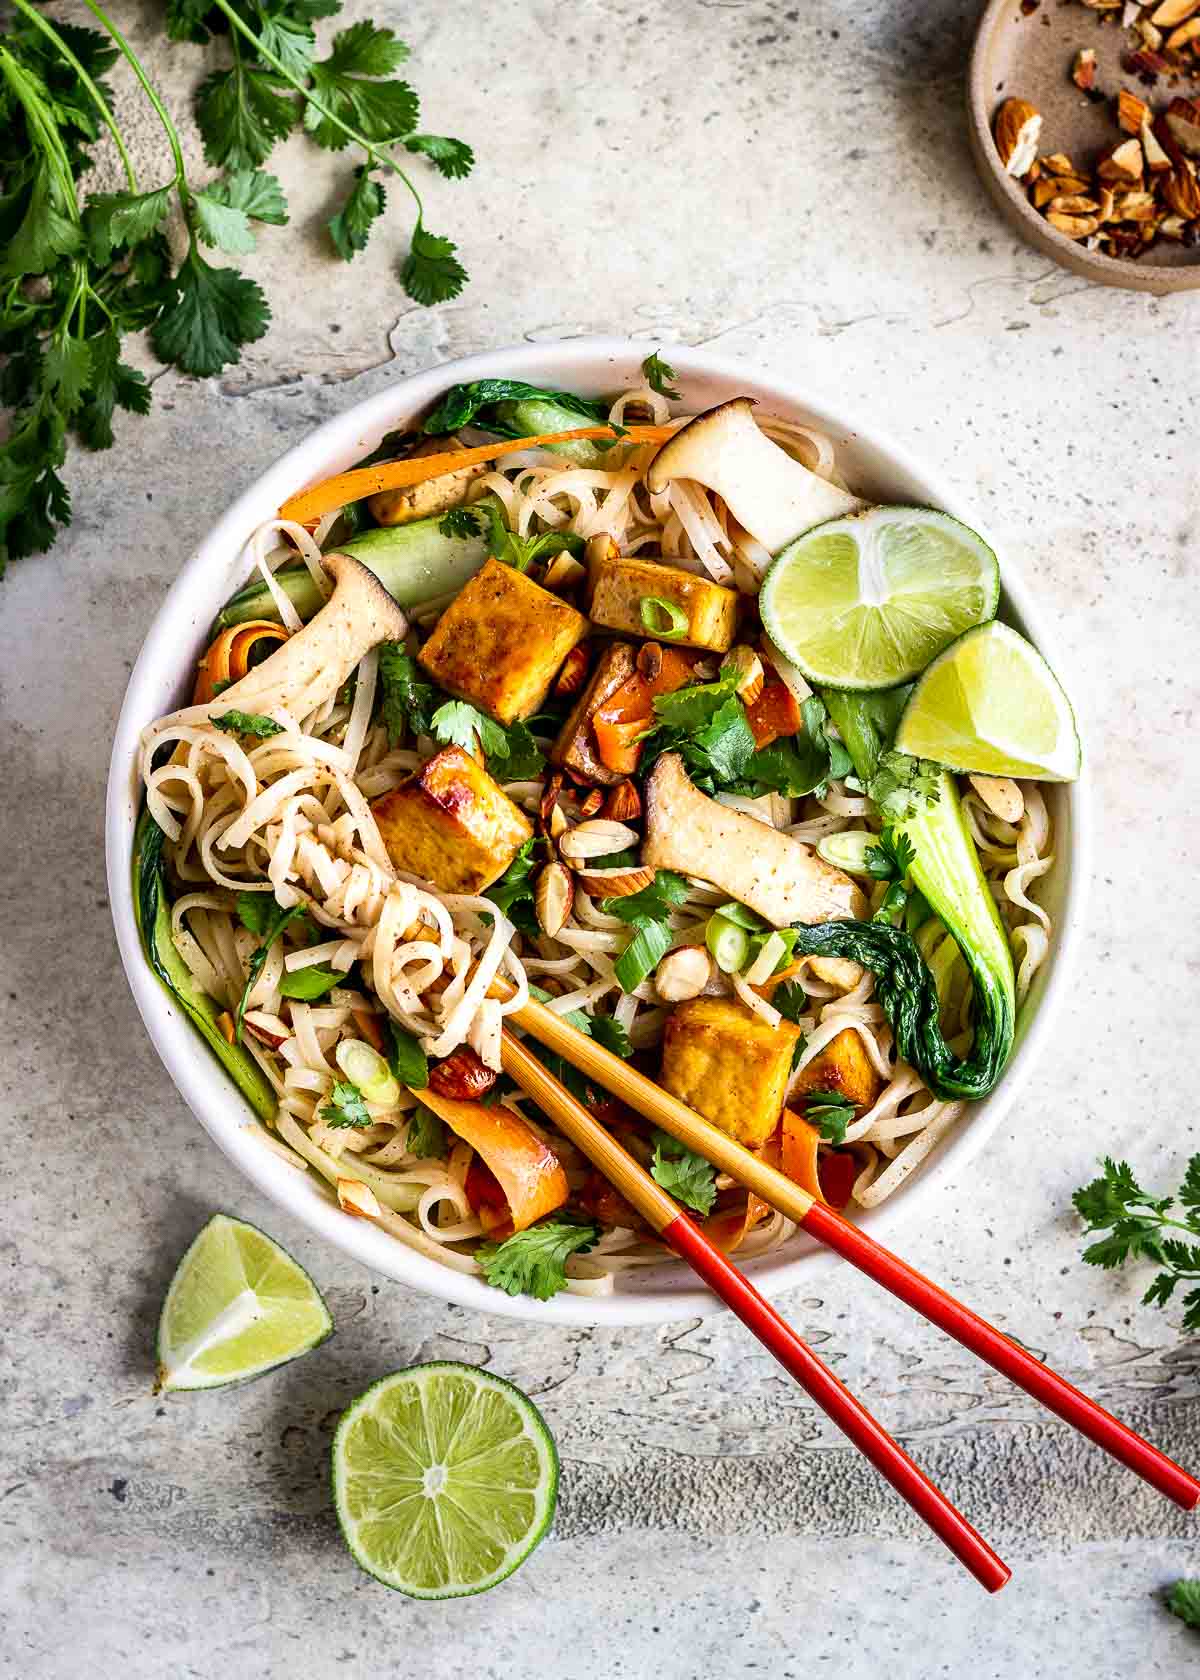 A bowl of tofu vegan noodles with almond butter and vegetables.